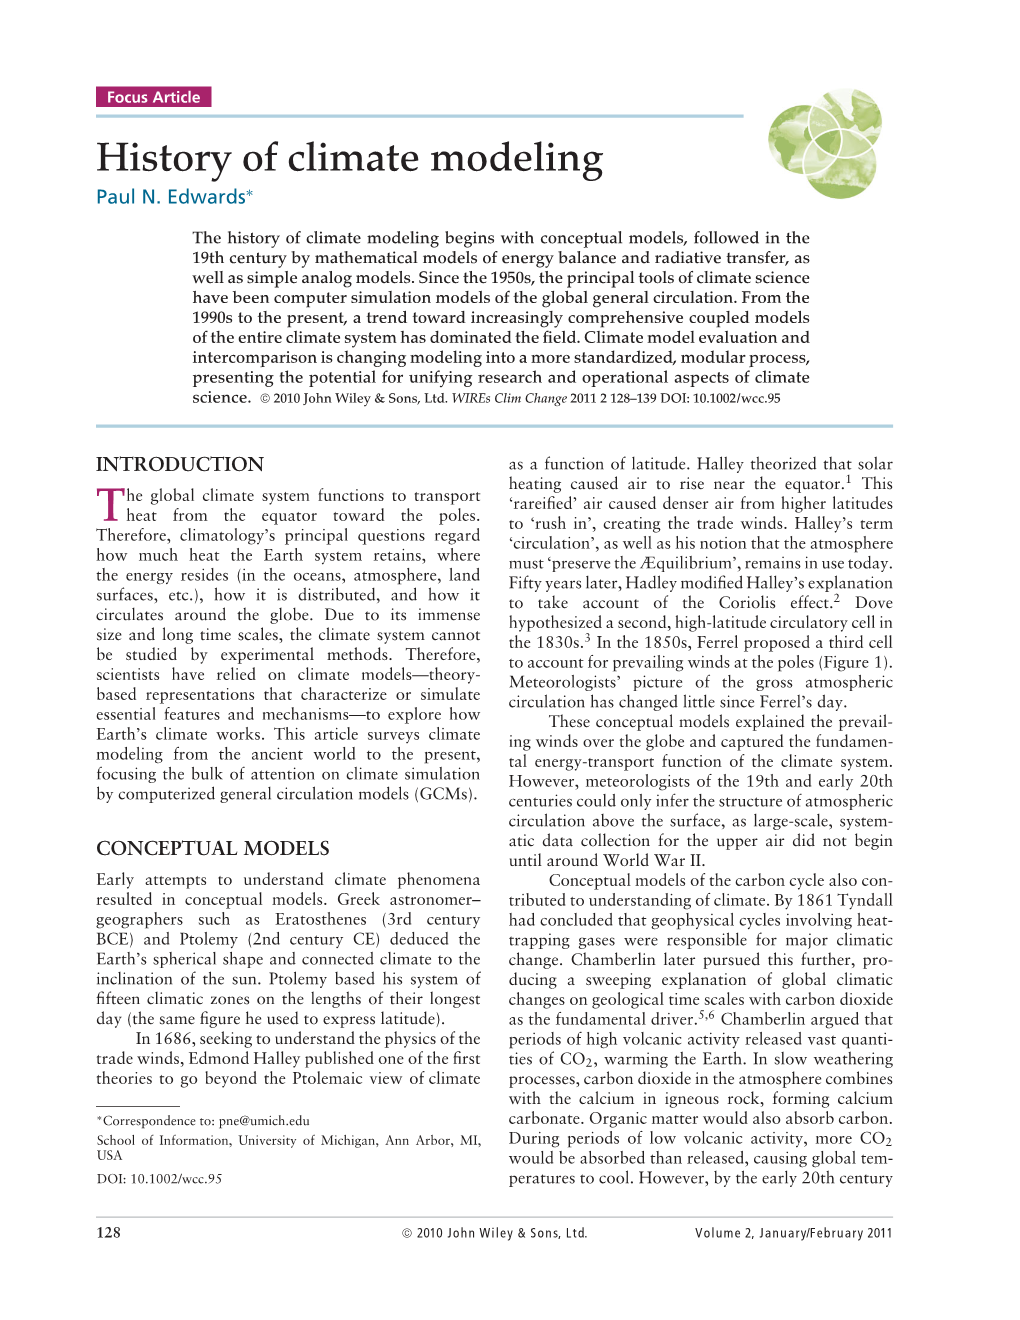 History of Climate Modeling Paul N